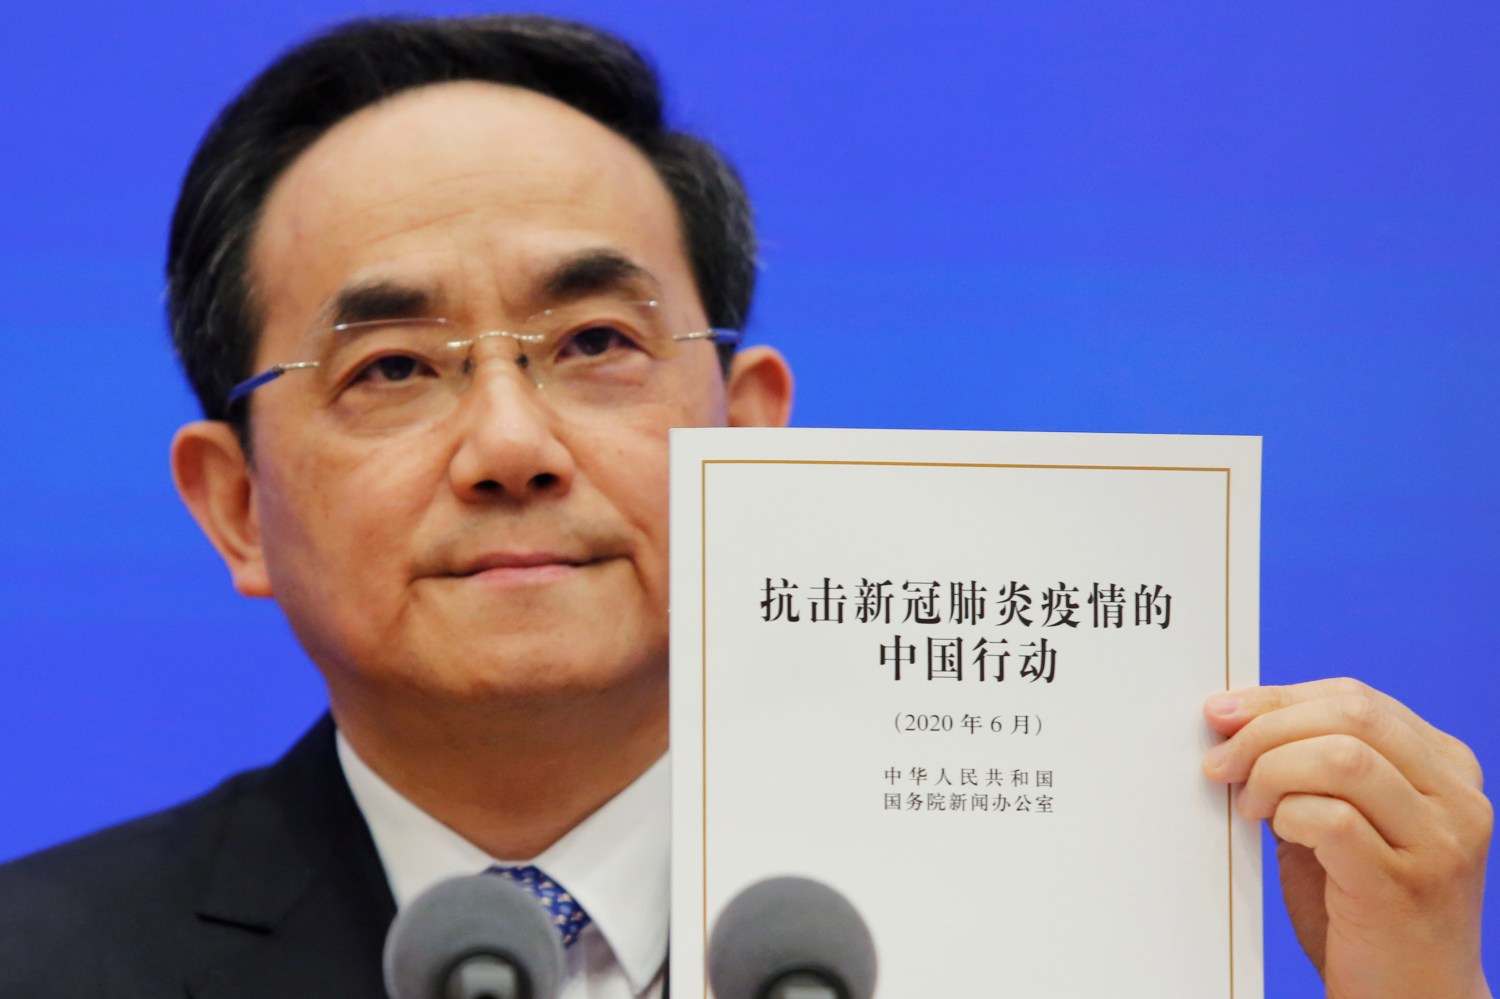 Xu Lin, vice head of the publicity department of the Communist Party of China (CPC) Central Committee, holds a copy of the white paper about China's fight against the coronavirus disease (COVID-19) during a State Council Information Office (SCIO) briefing in Beijing, China June 7, 2020.  REUTERS/Florence Lo